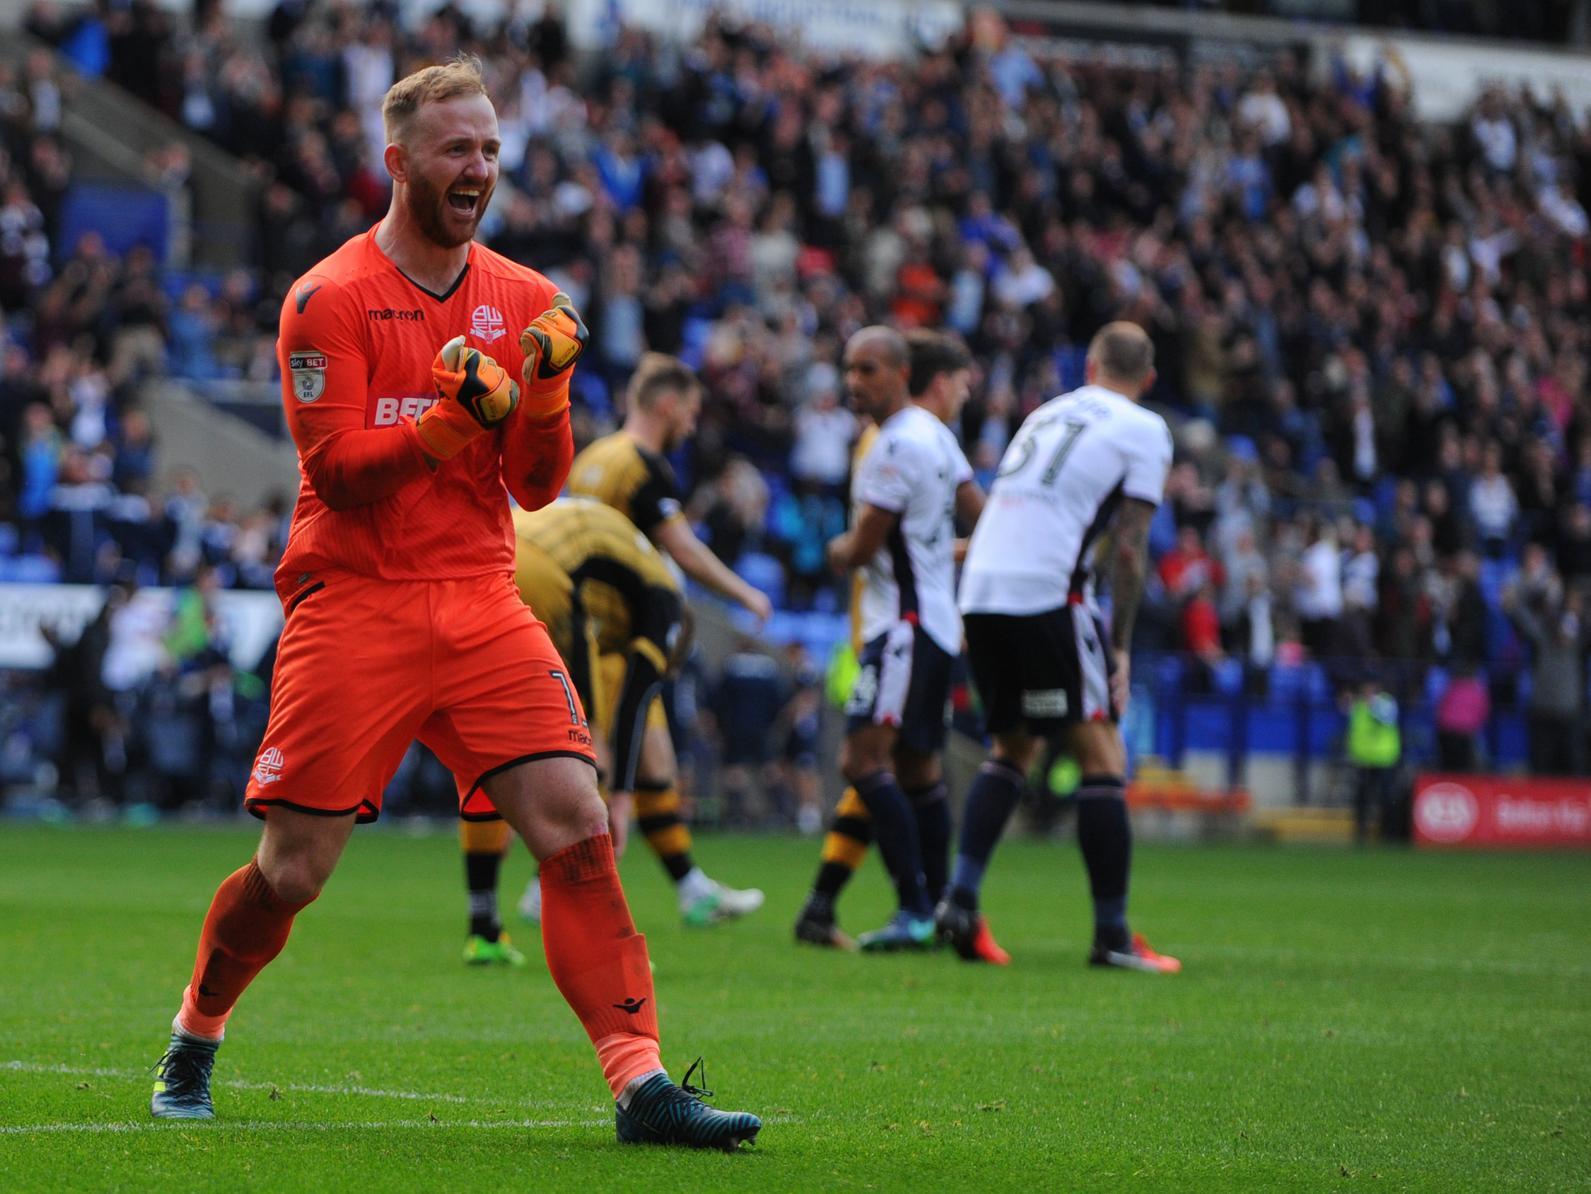 Phil Parkinson revealed that Alnwick was training with the Black Cats after leaving Bolton Wanderers. Whether he remains there is unknown, but the stopper could prove an option if Sunderland need to dip into the market.